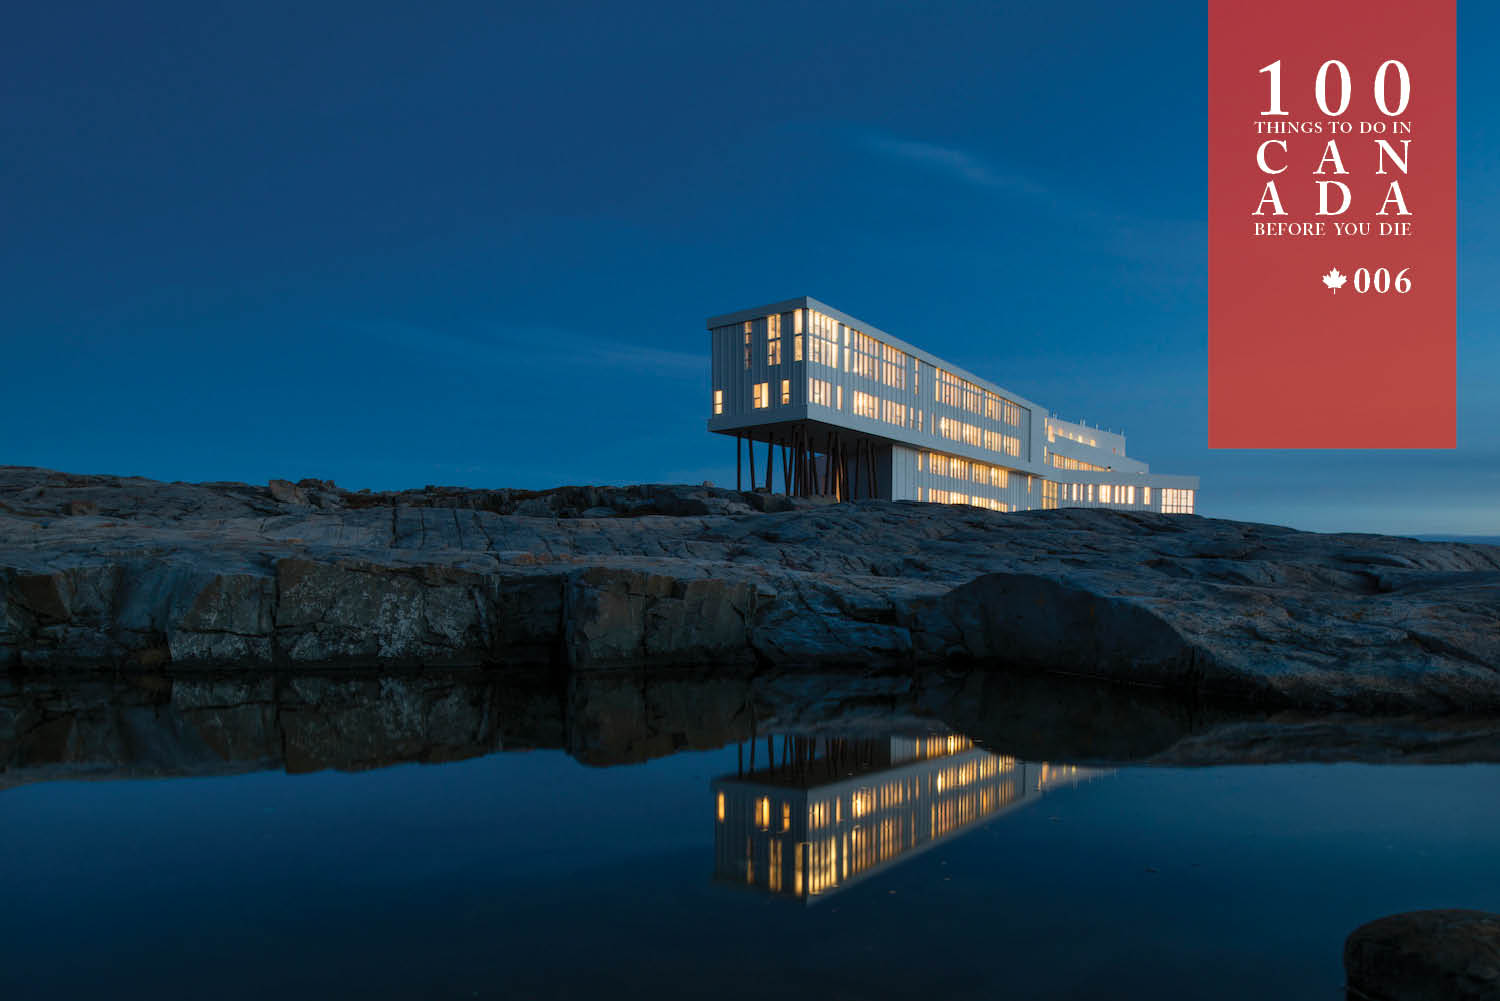 Perch yourself on the edge of the world at Fogo Island Inn